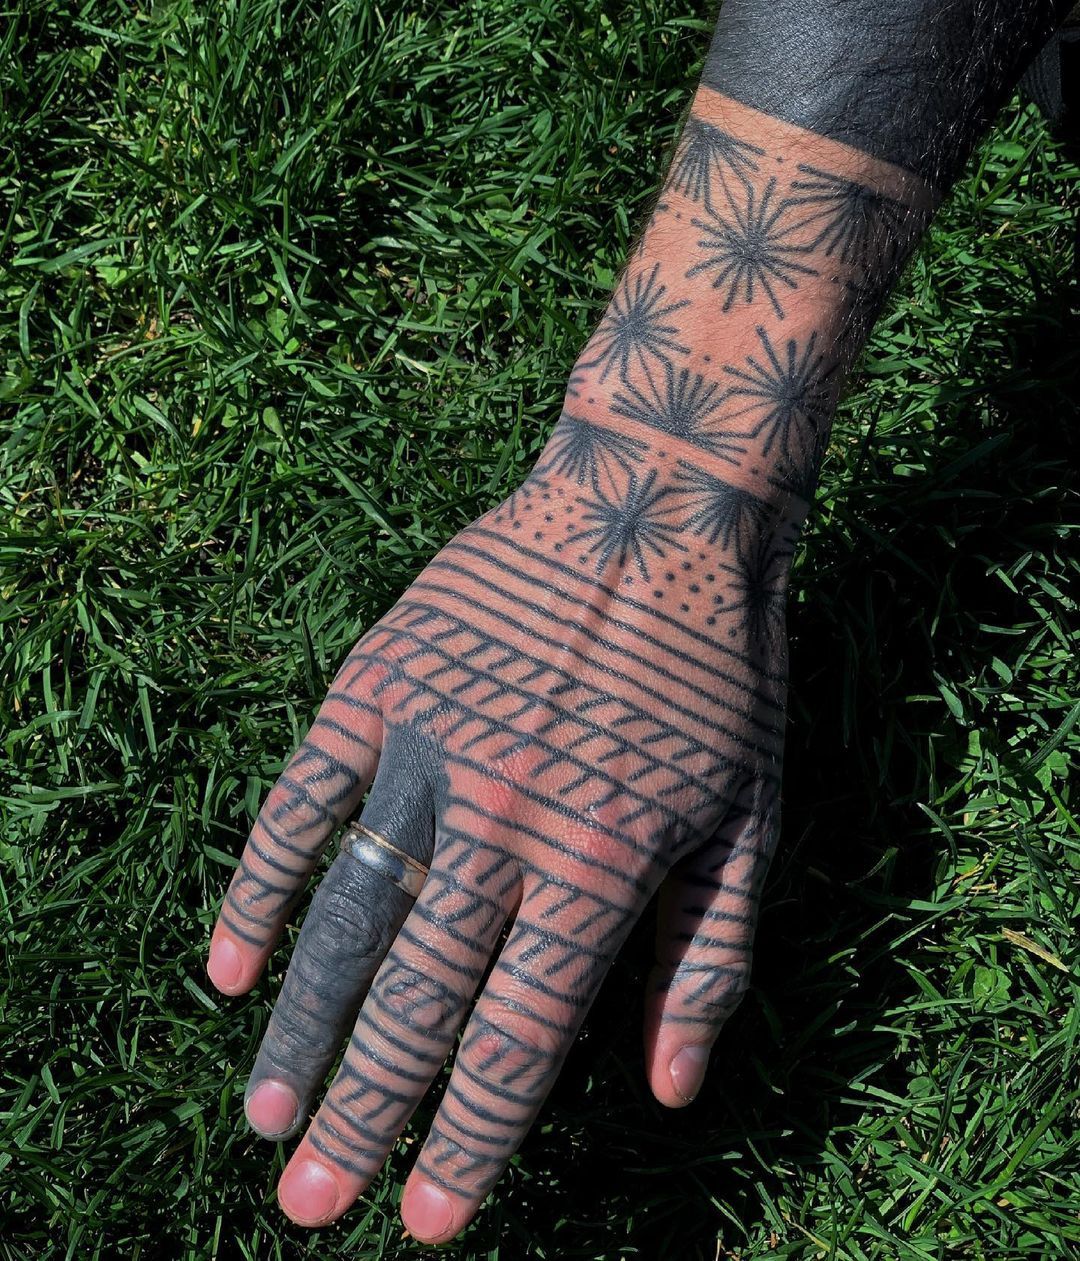 Bastien Jean  Tattooing  Healed wrist hand and finger on my friend